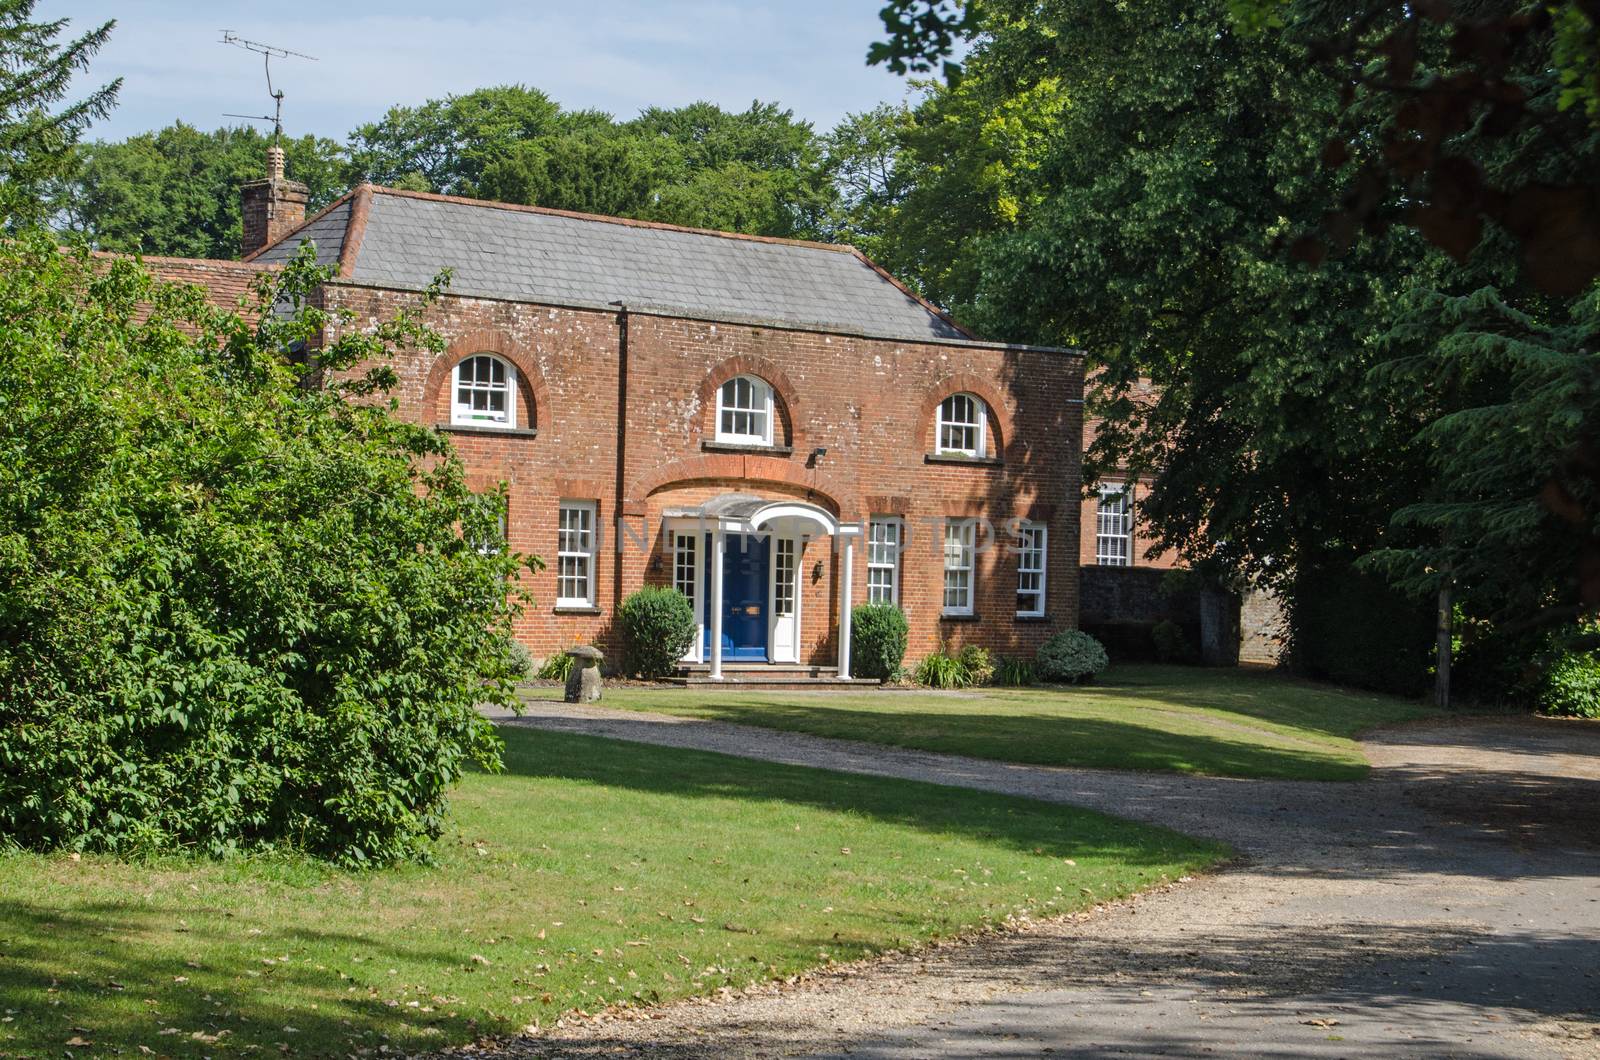 View of the historic former coach house built in Georgian times at Worting House in Basingstoke, Hampshire.  The novelist Jane Austen lived nearby and visited the stately home now turned into offices.